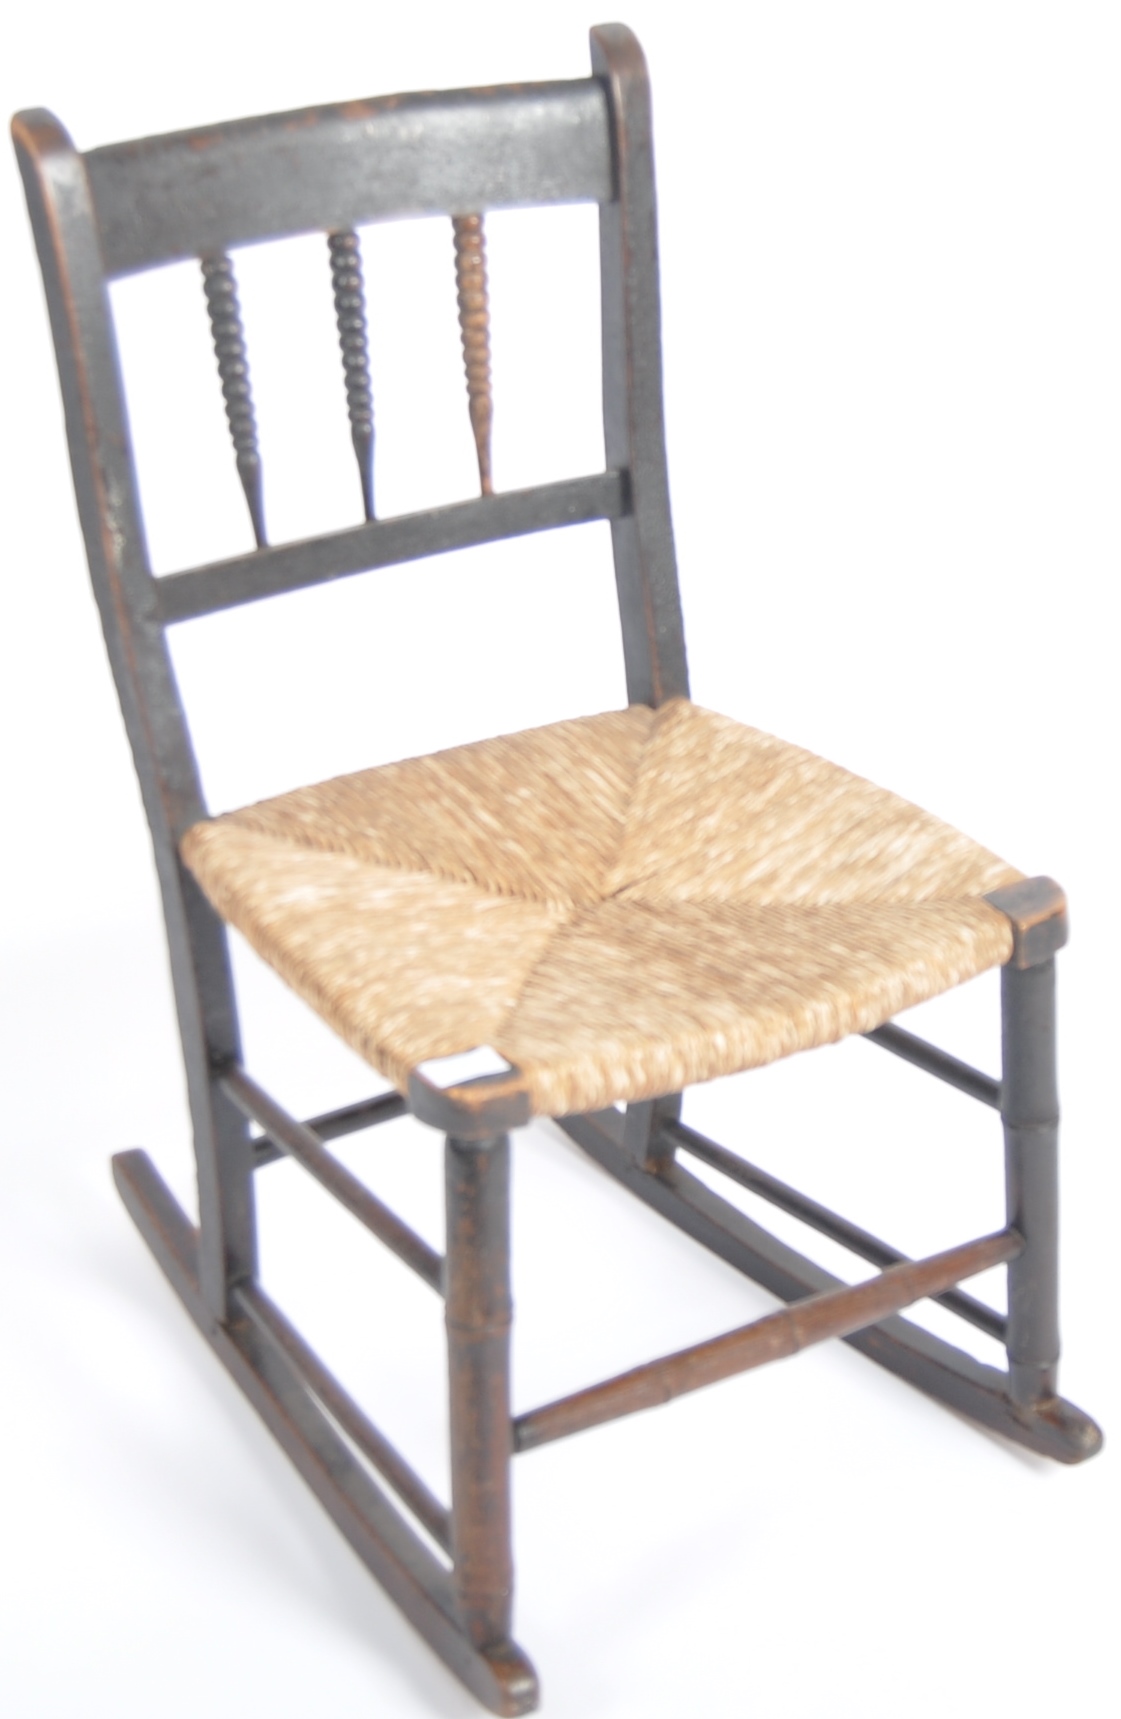 19TH CENTURY CHILDS ROCKING CHAIR - Image 2 of 6